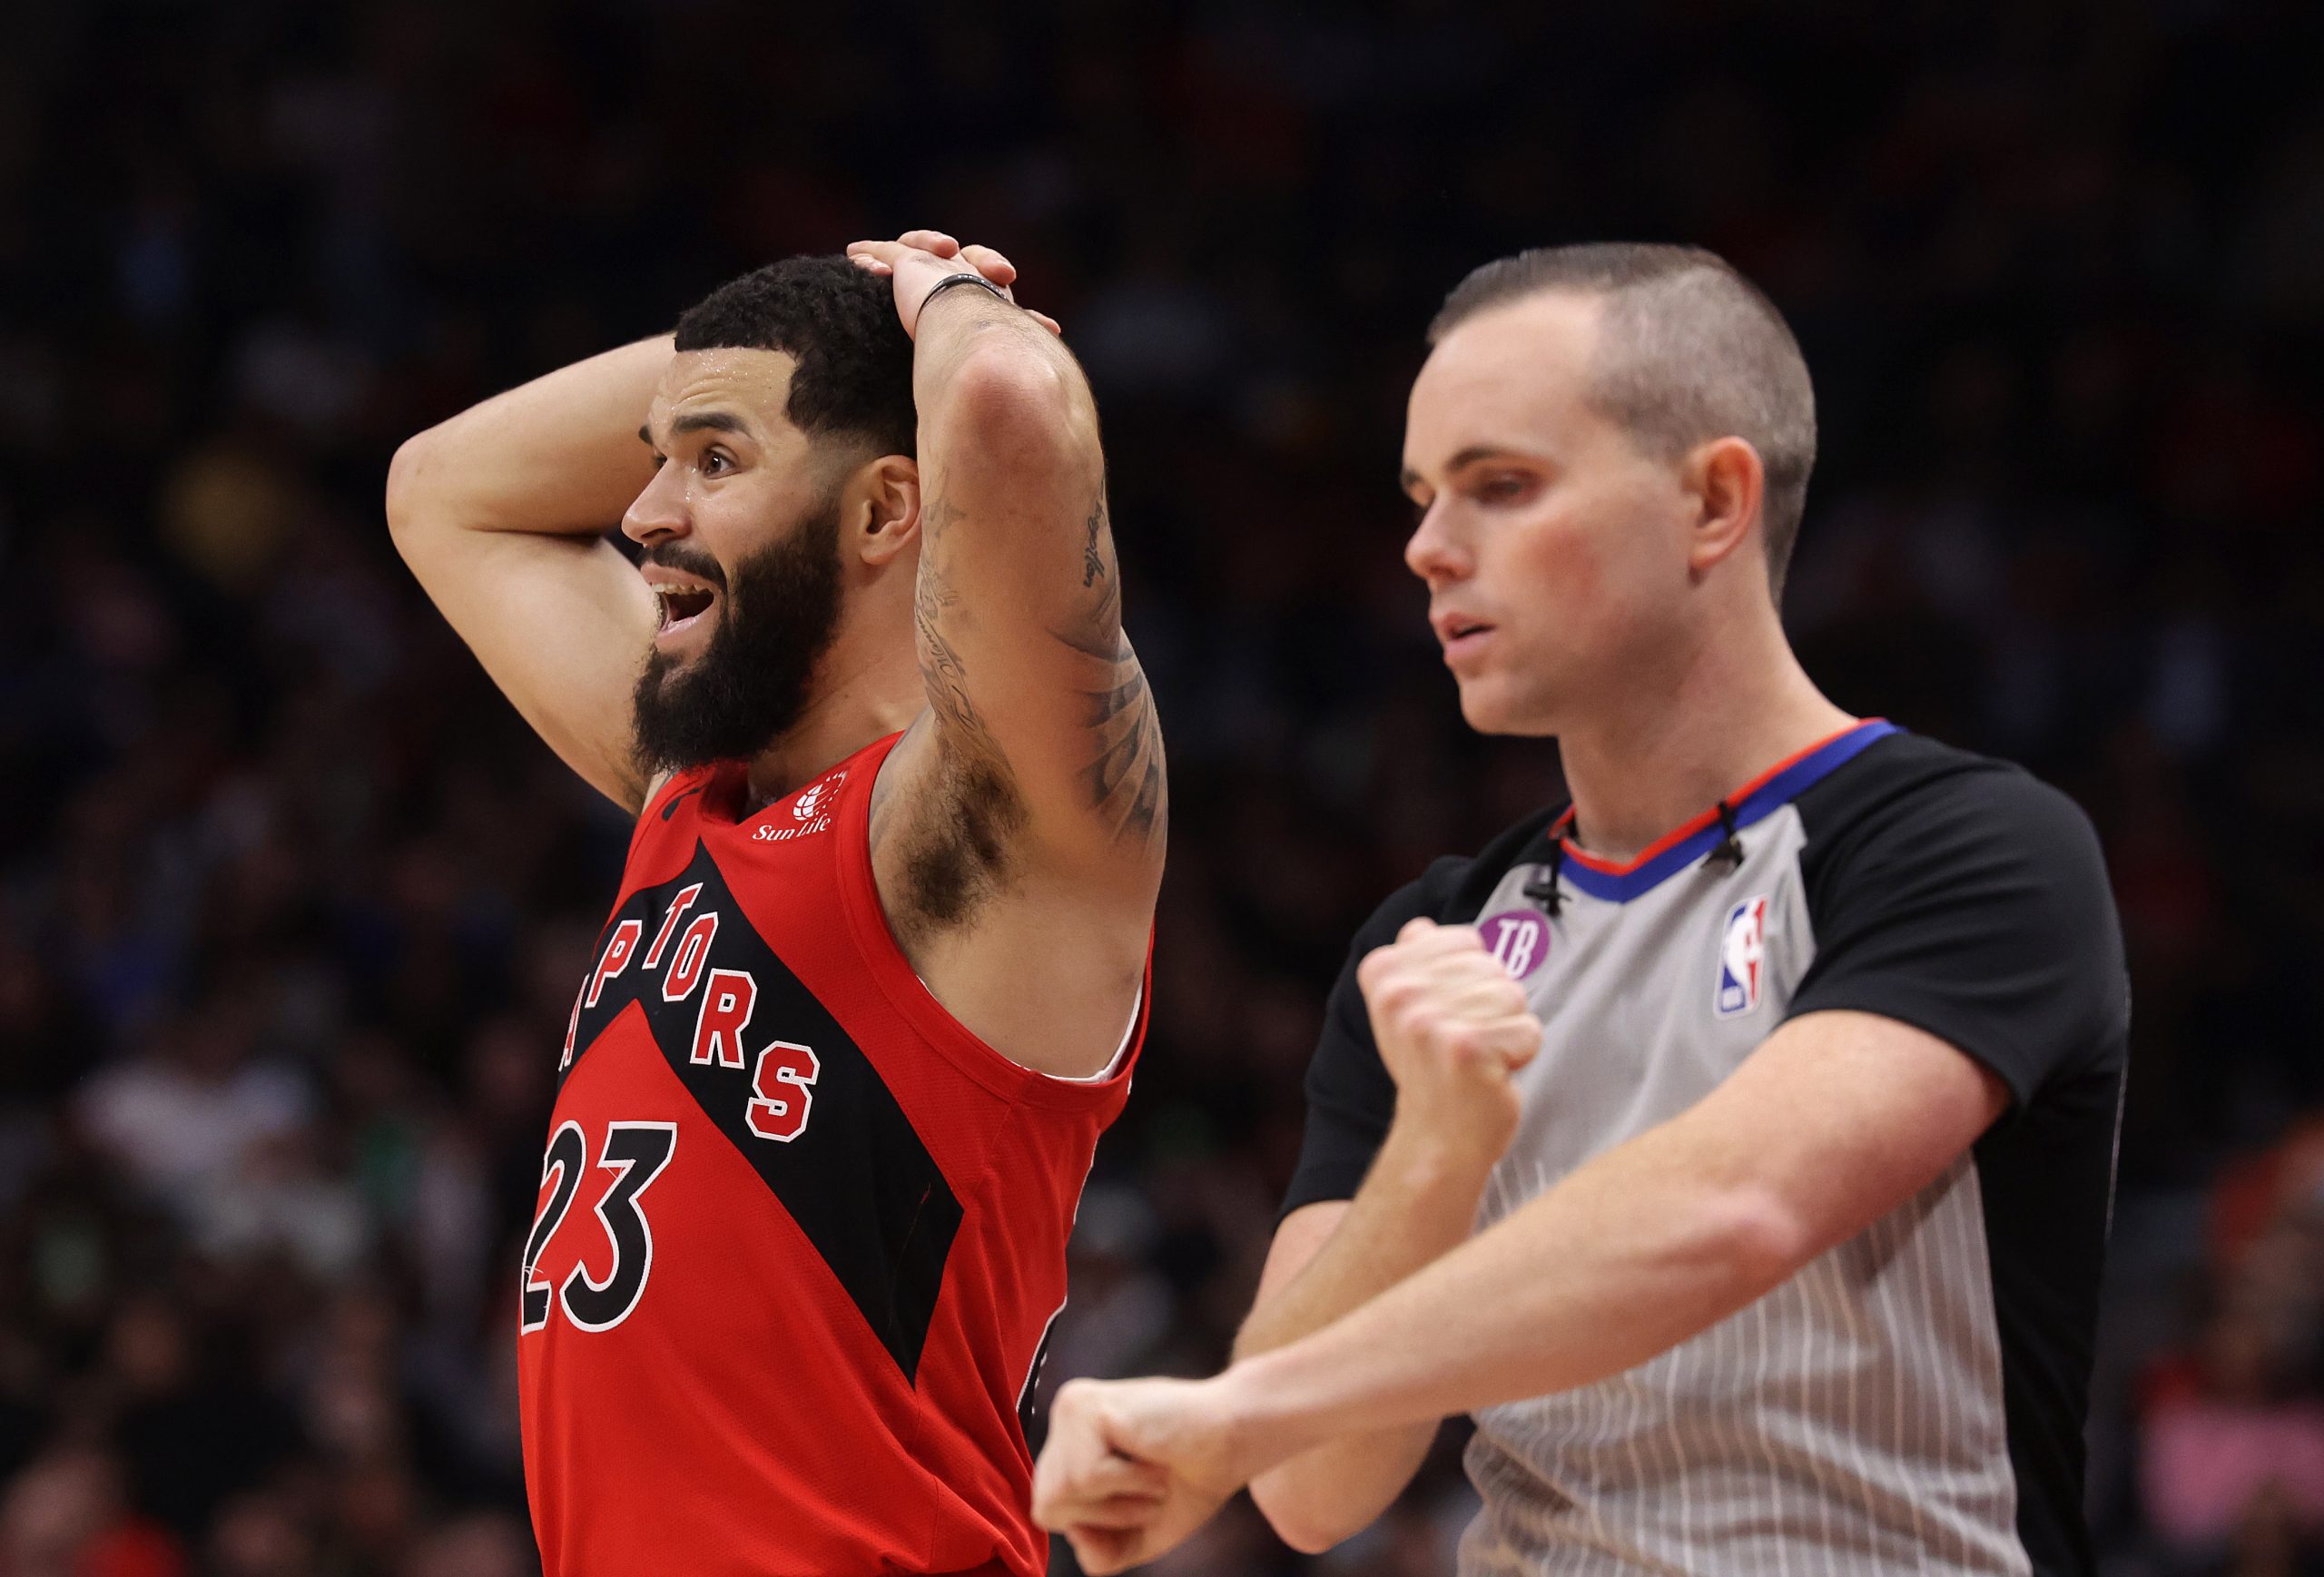 Toronto Raptors guard Fred VanVleet (23) reacts after getting called for a foul as the Toronto Rapt...